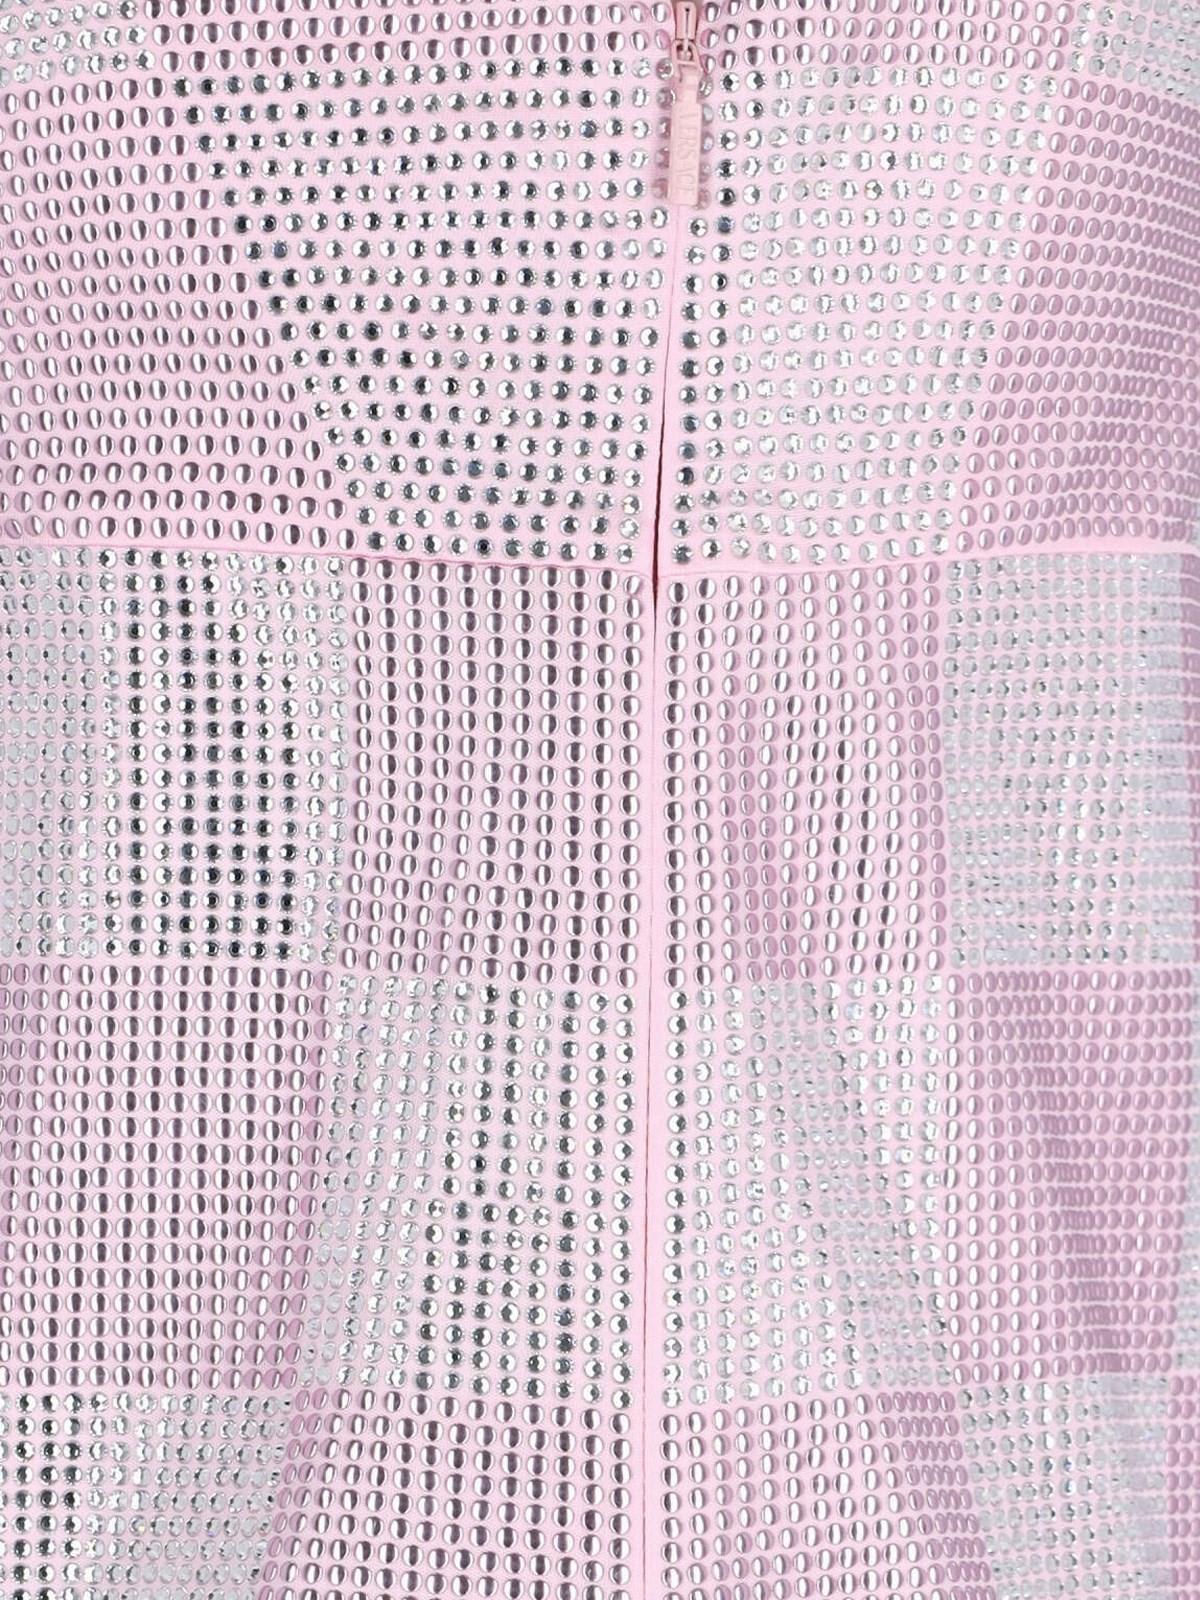 Shop Versace Check Mini Dress In Pink/silver